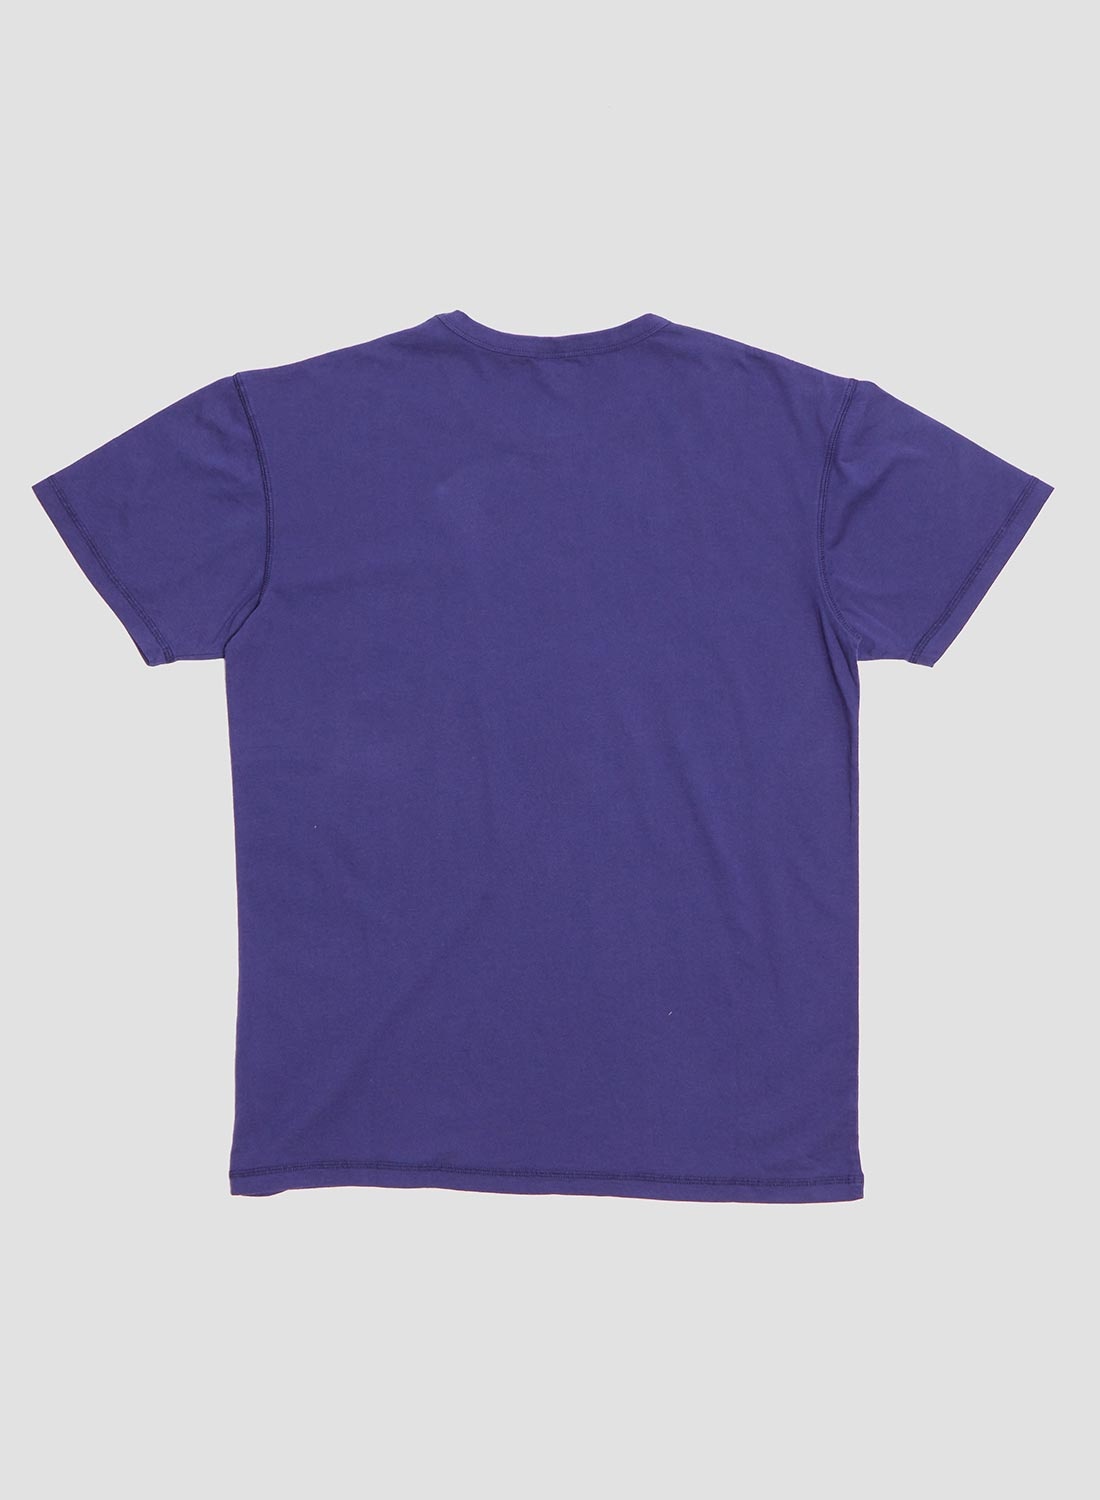 Classic Pocket Tee in Royal Blue - 3